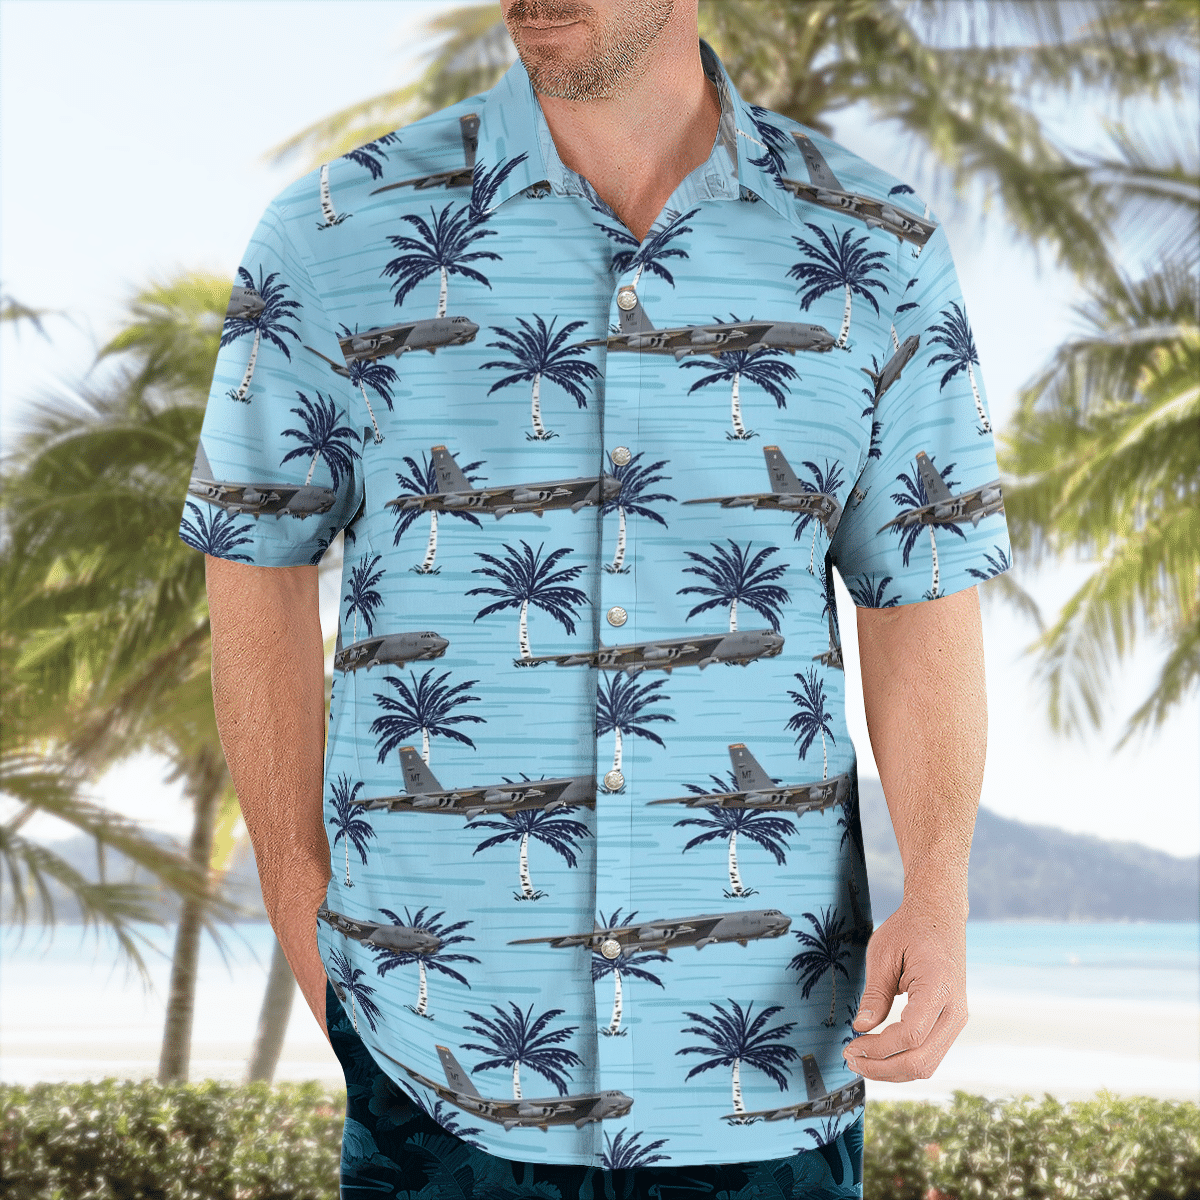 Top Hawaiian fashions that will give you a good look 318